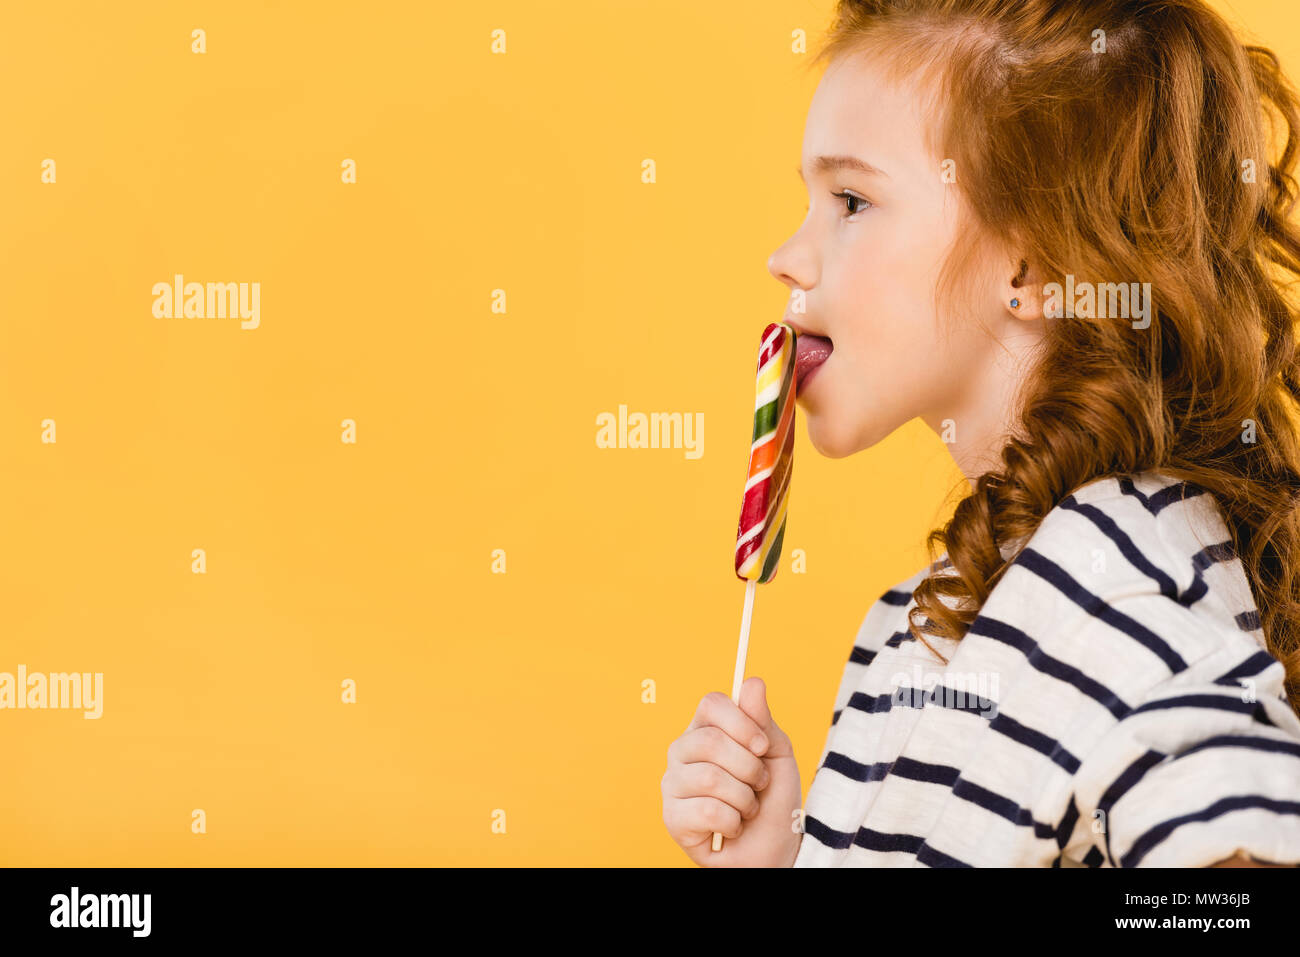 side view of preteen child eating lollipop isolated on yellow Stock Photo